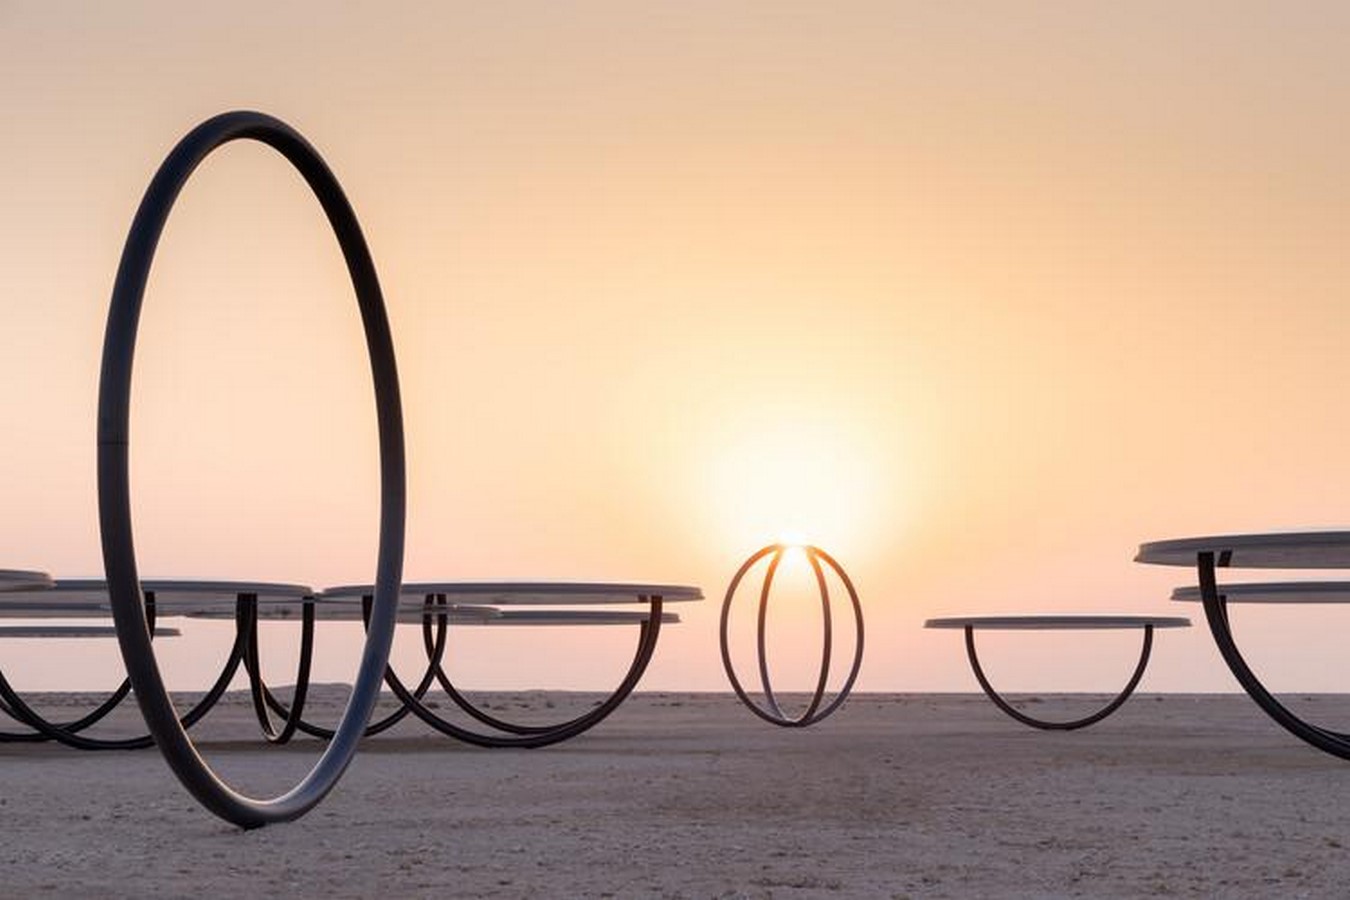 “Shadows Travelling on the Sea of the Day” Olafur Eliasson’s Site-Specific Installation, opens in Doha, Qatar - Sheet